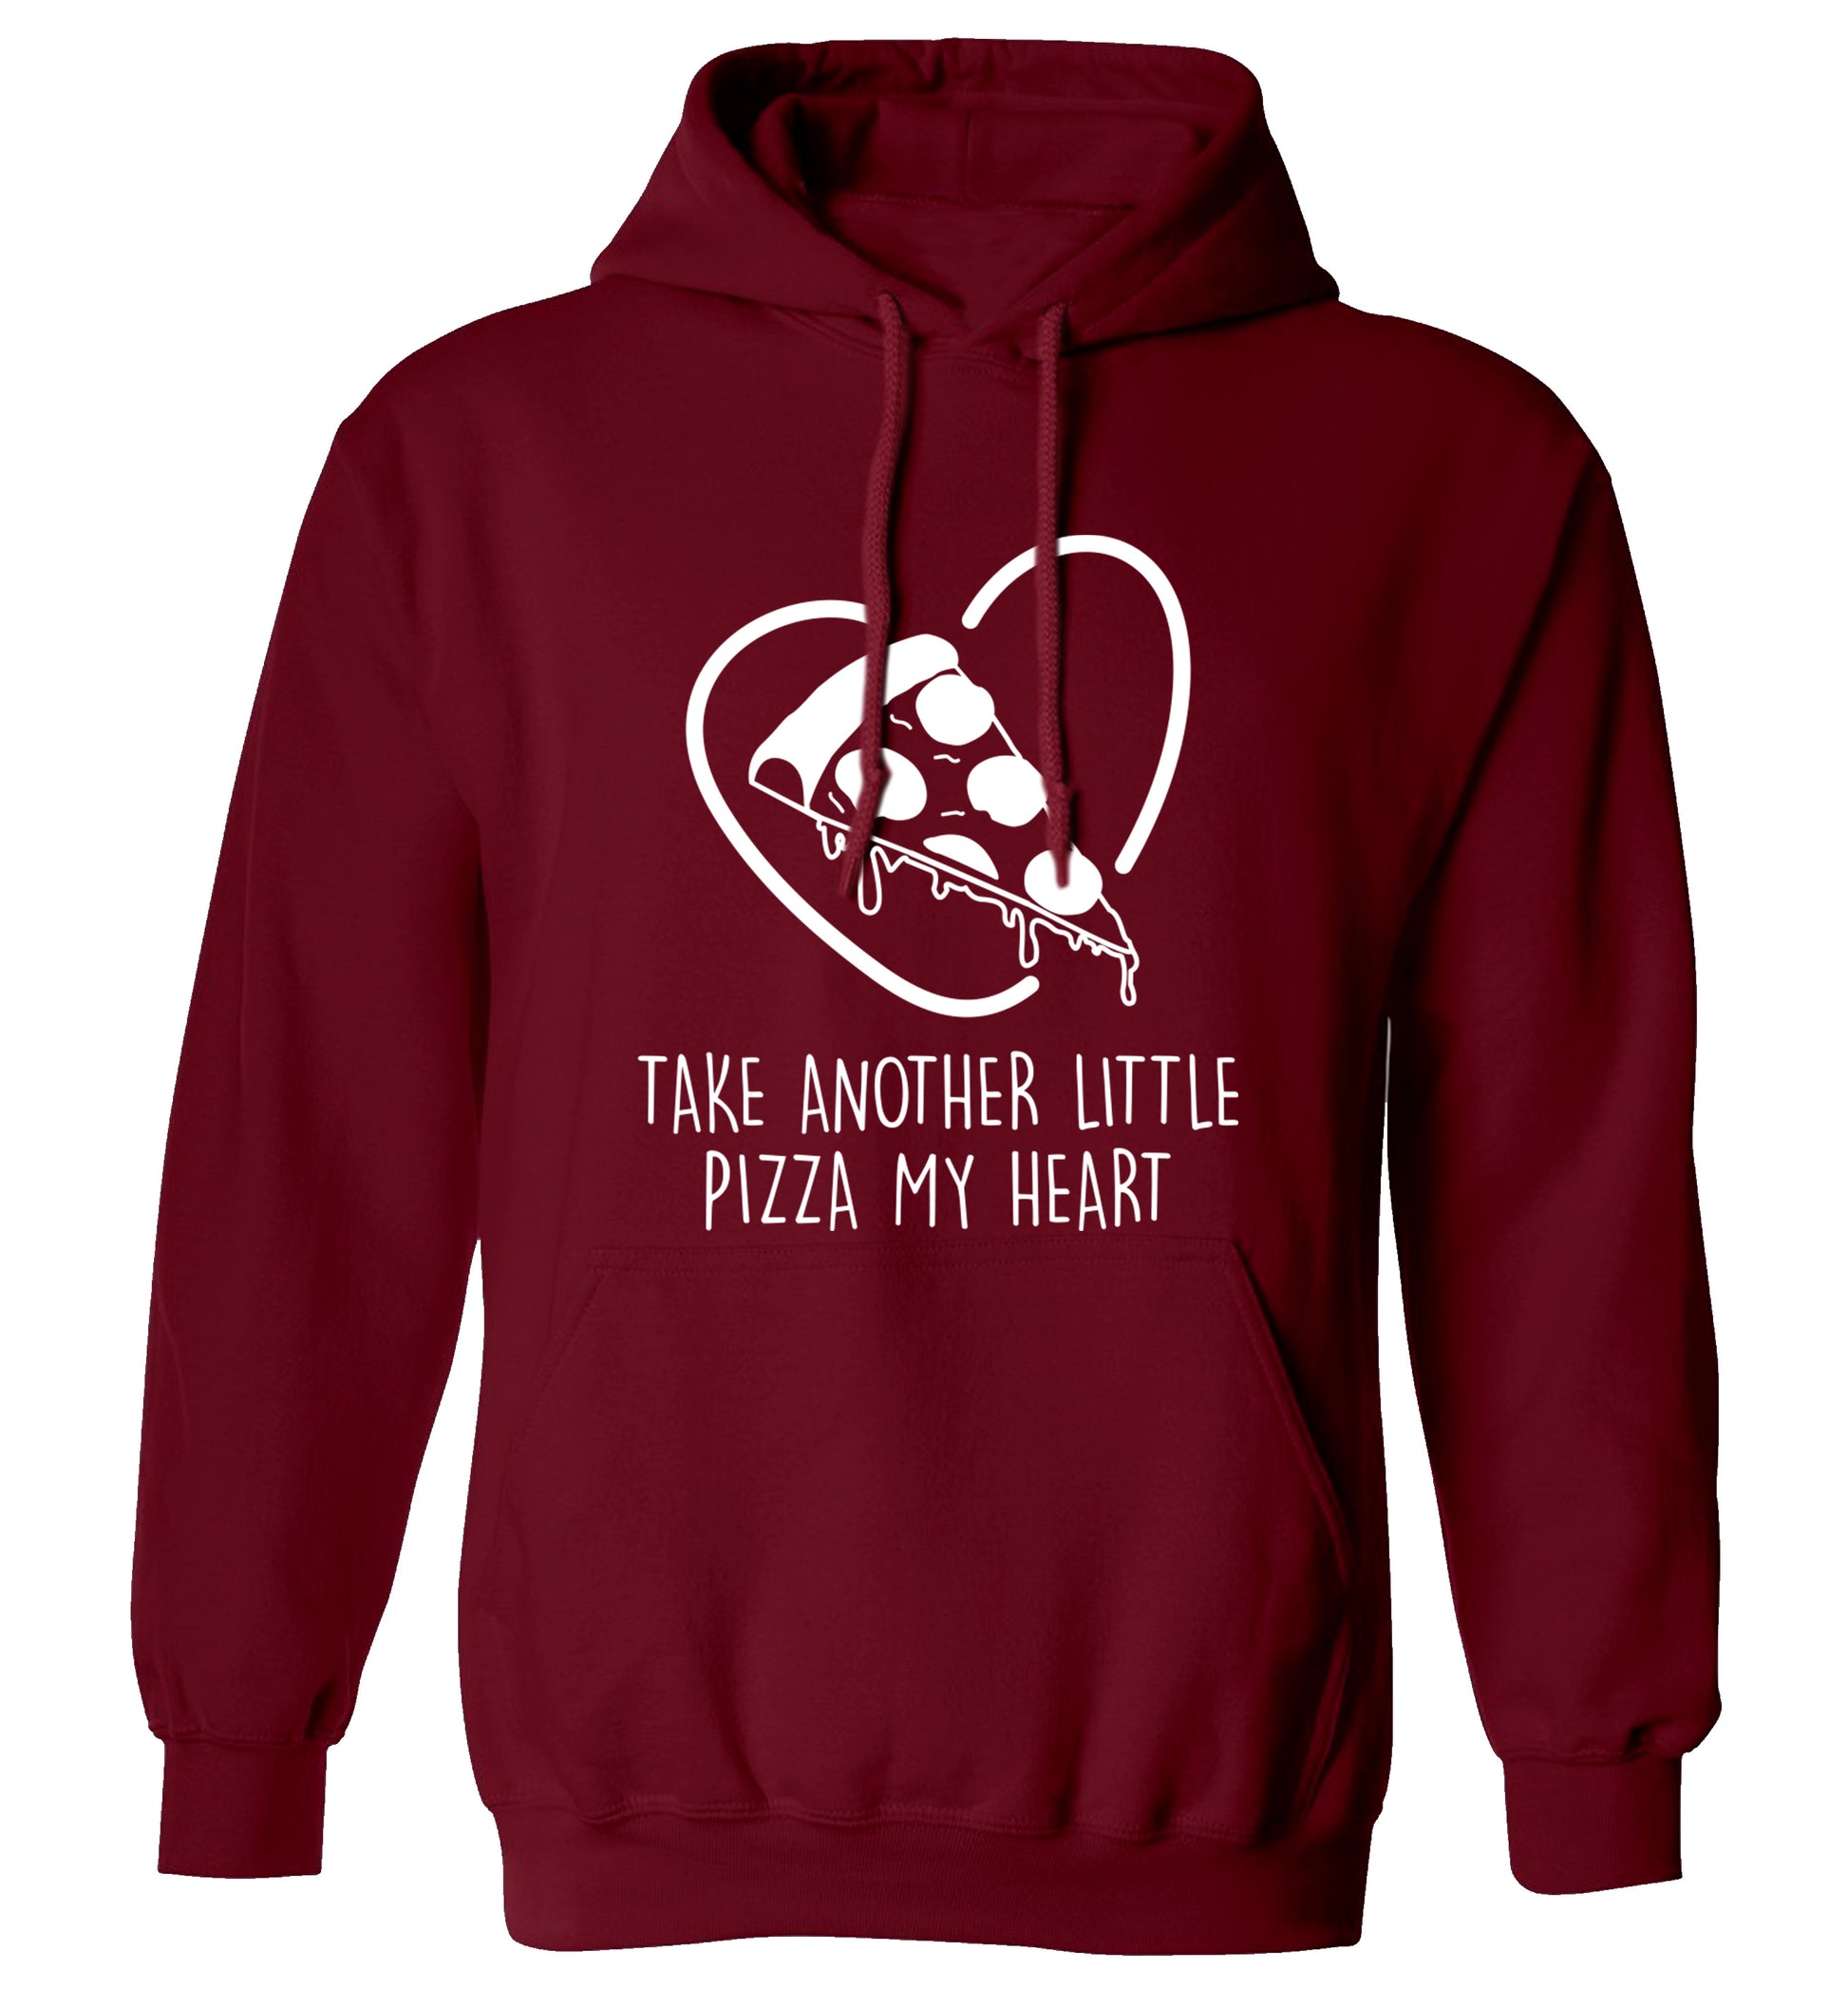 Take another little pizza my heart adults unisex maroon hoodie 2XL